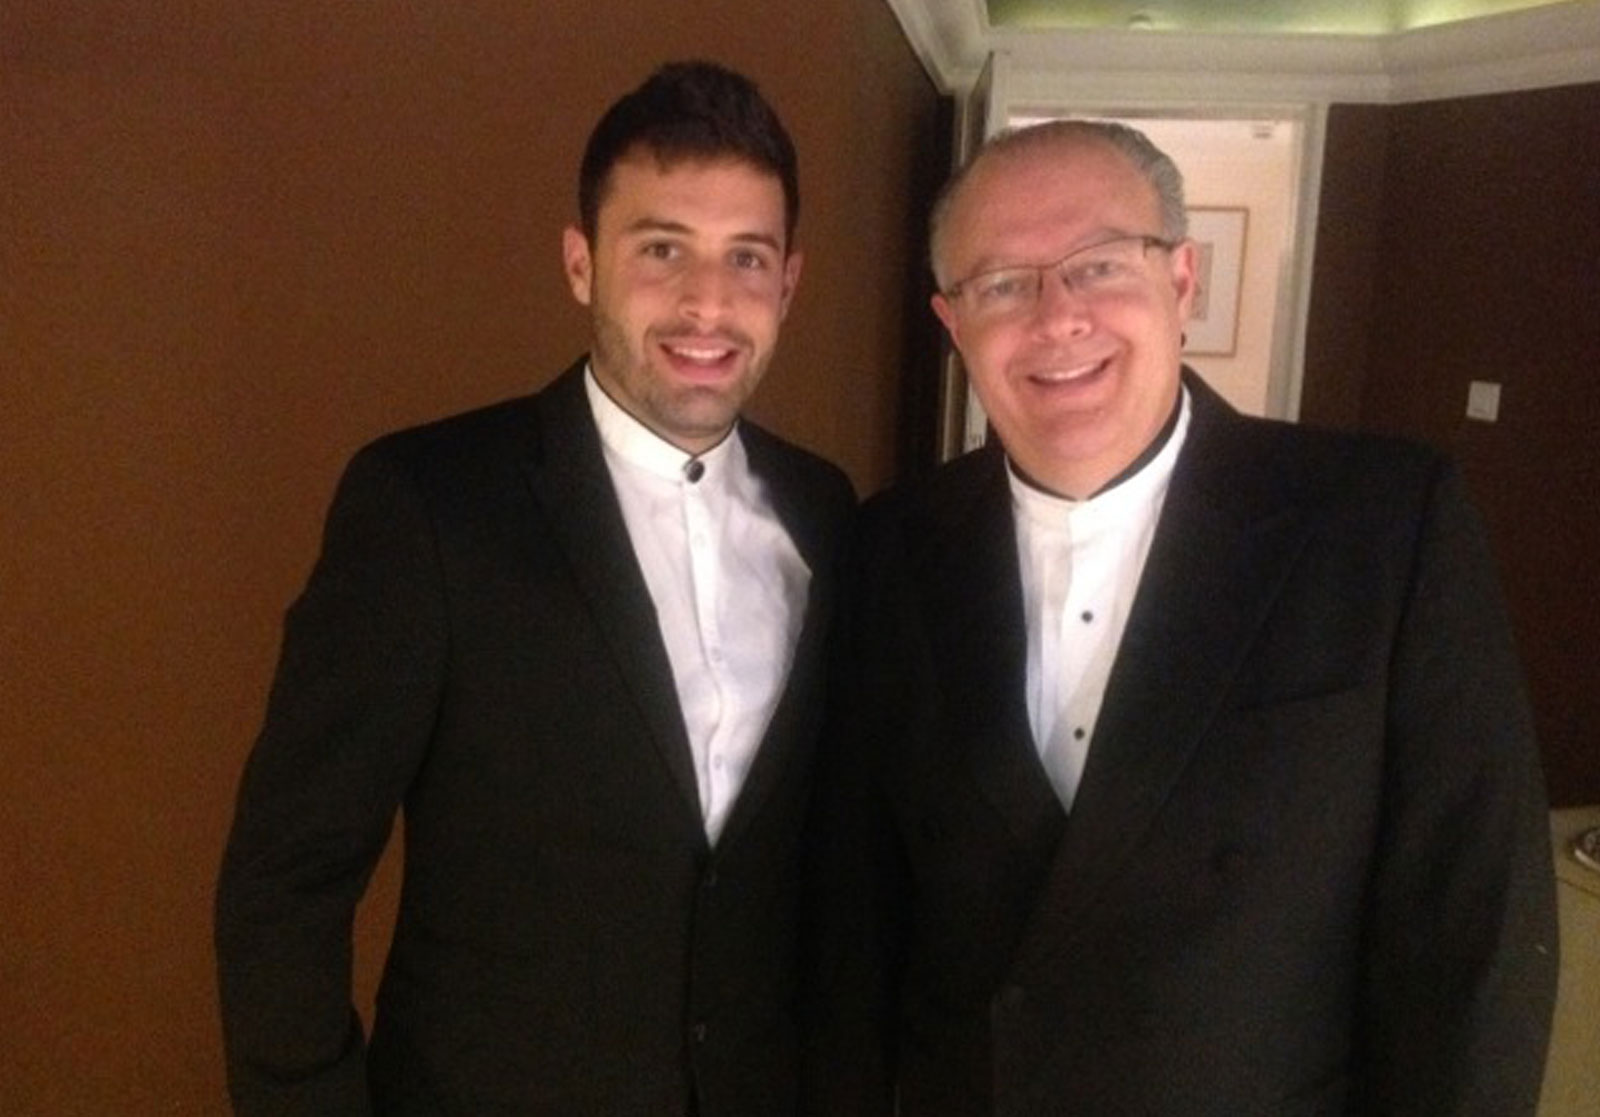 With-Gabi-after-our-first-joint-performance-with-the-Jerusalem-Symphony-Orchestra-2013_G